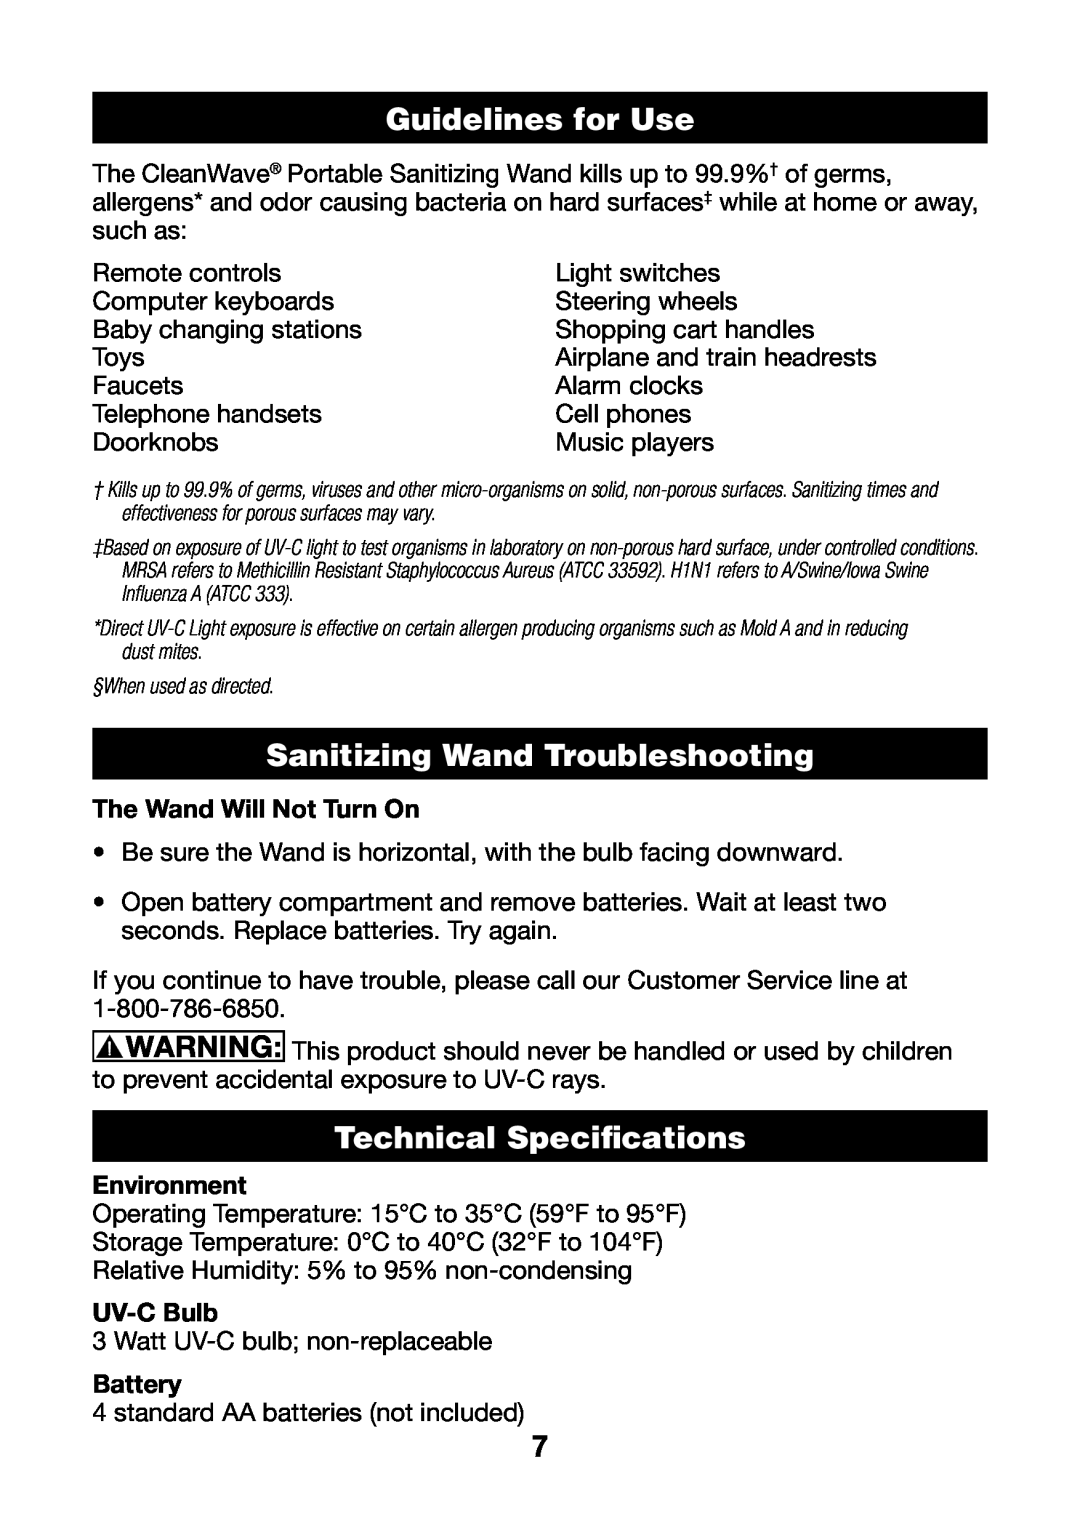 Verilux VH03 Guidelines for Use, Sanitizing Wand Troubleshooting, Technical Specifications, The Wand Will Not Turn On 